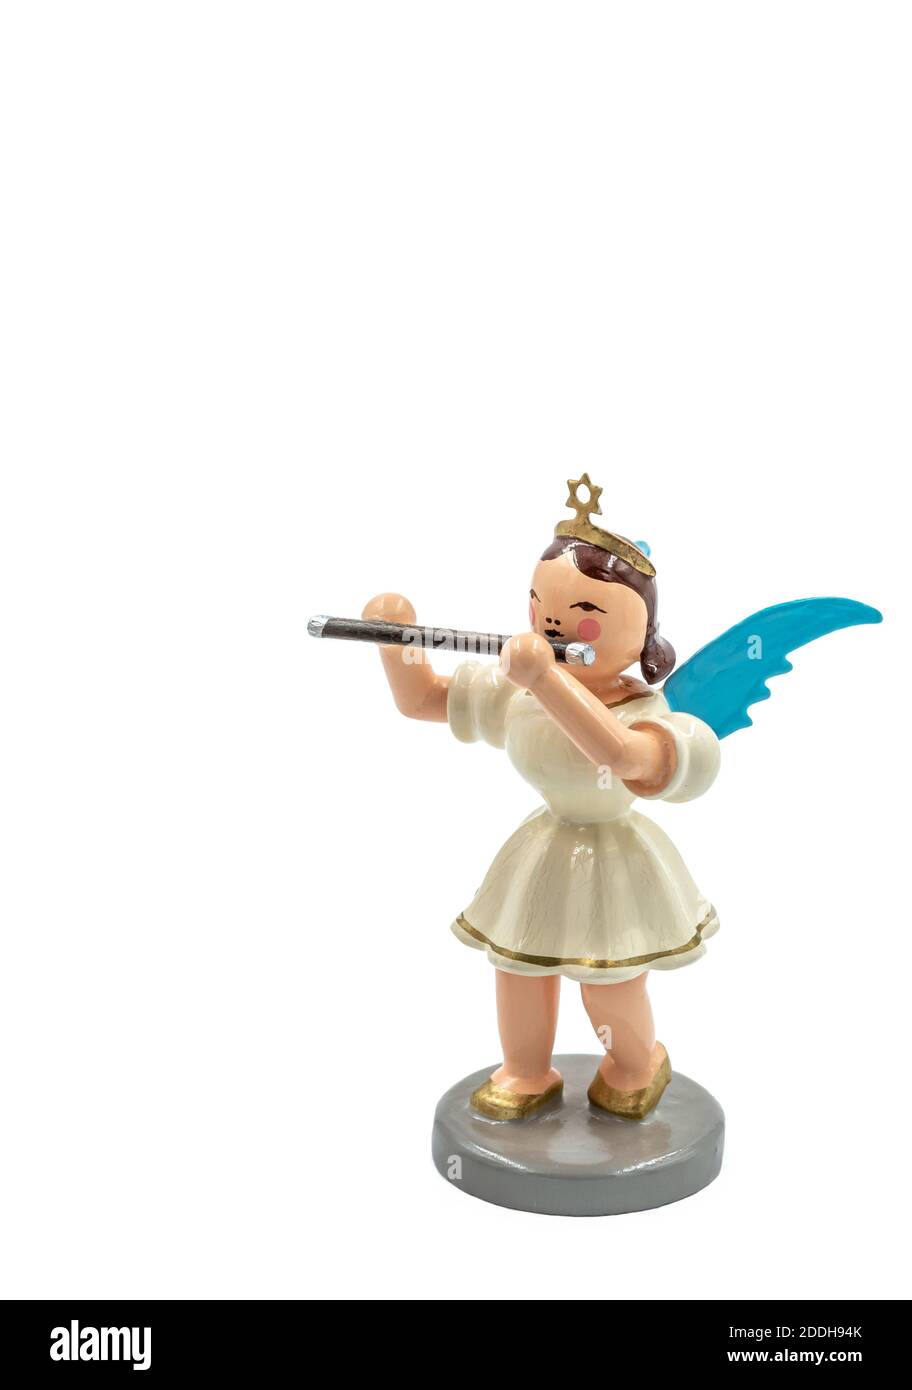 Closeup of a original handcarved wooden German Christmas Angel figurines with a flute cut out on a white background Stock Photo